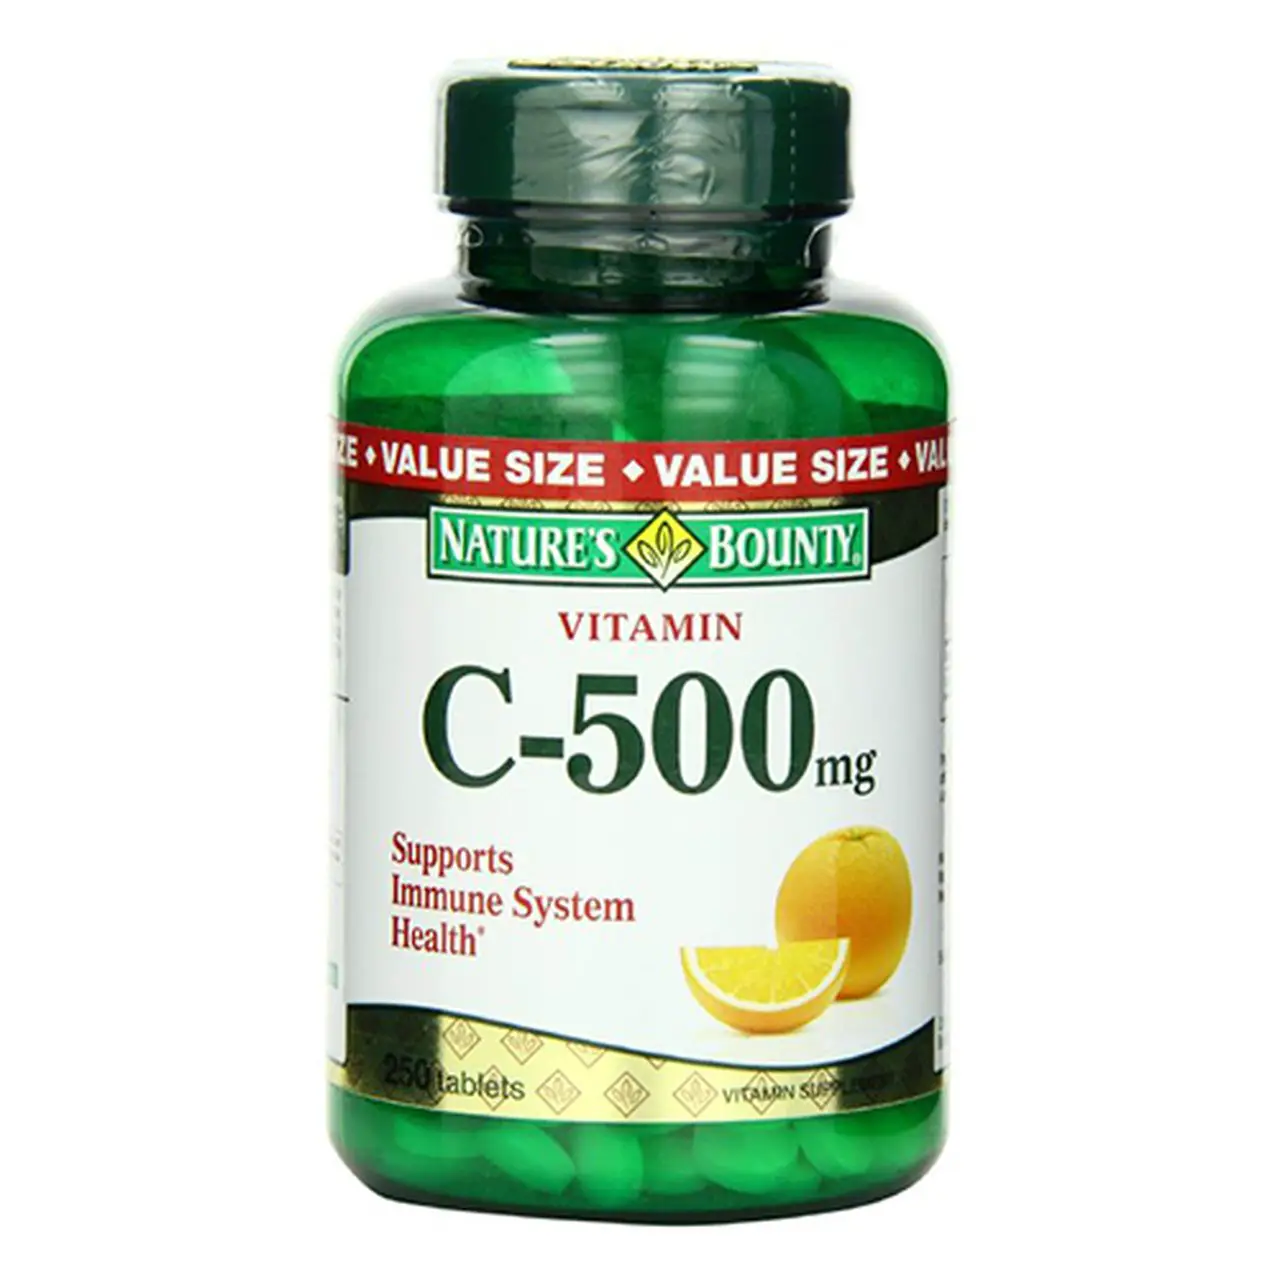 Vitamin C 500 Mg Dietary Supplement Tablets, By Natures Bounty